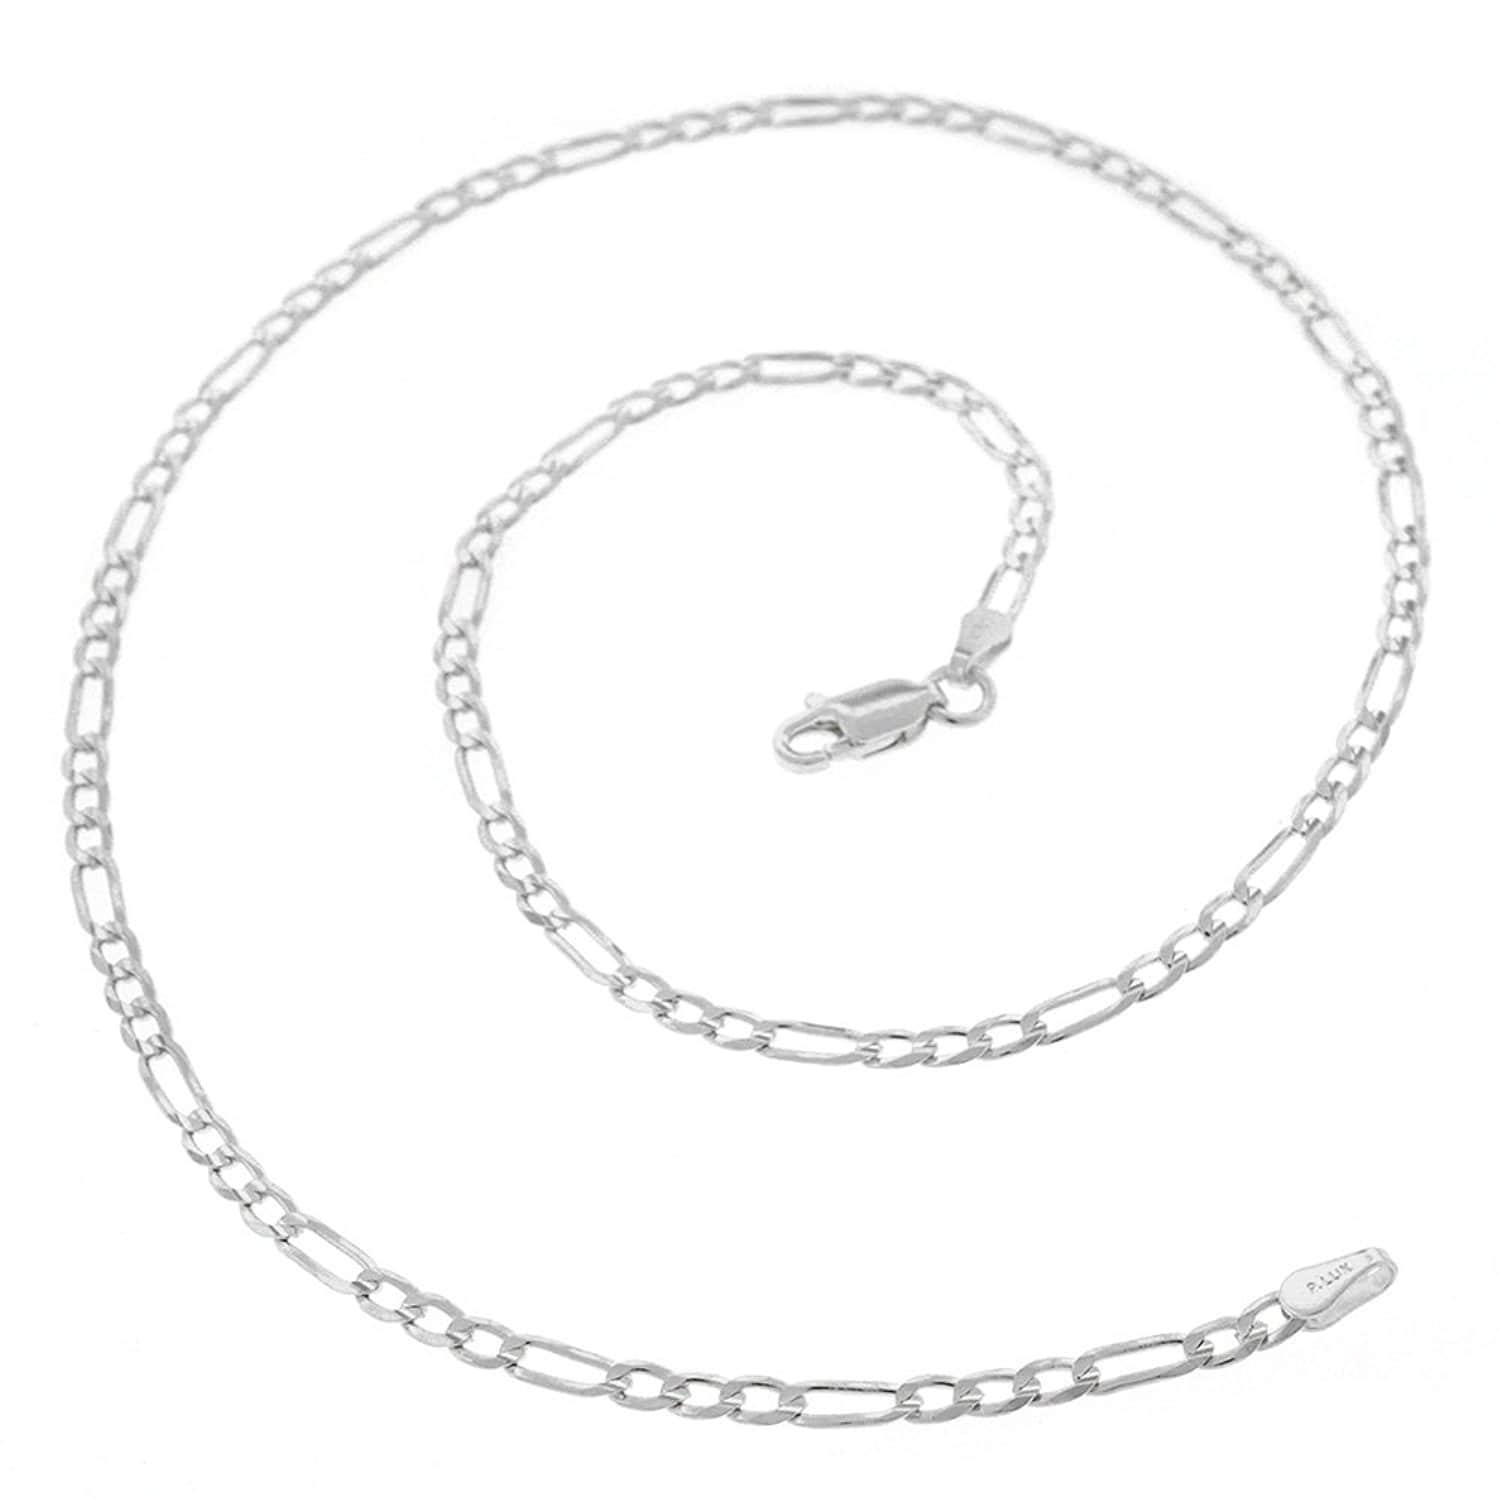 20" 50cm Italian Real Solid 925 Sterling Silver 3mm FIGARO CHAIN NECKLACE Unisex